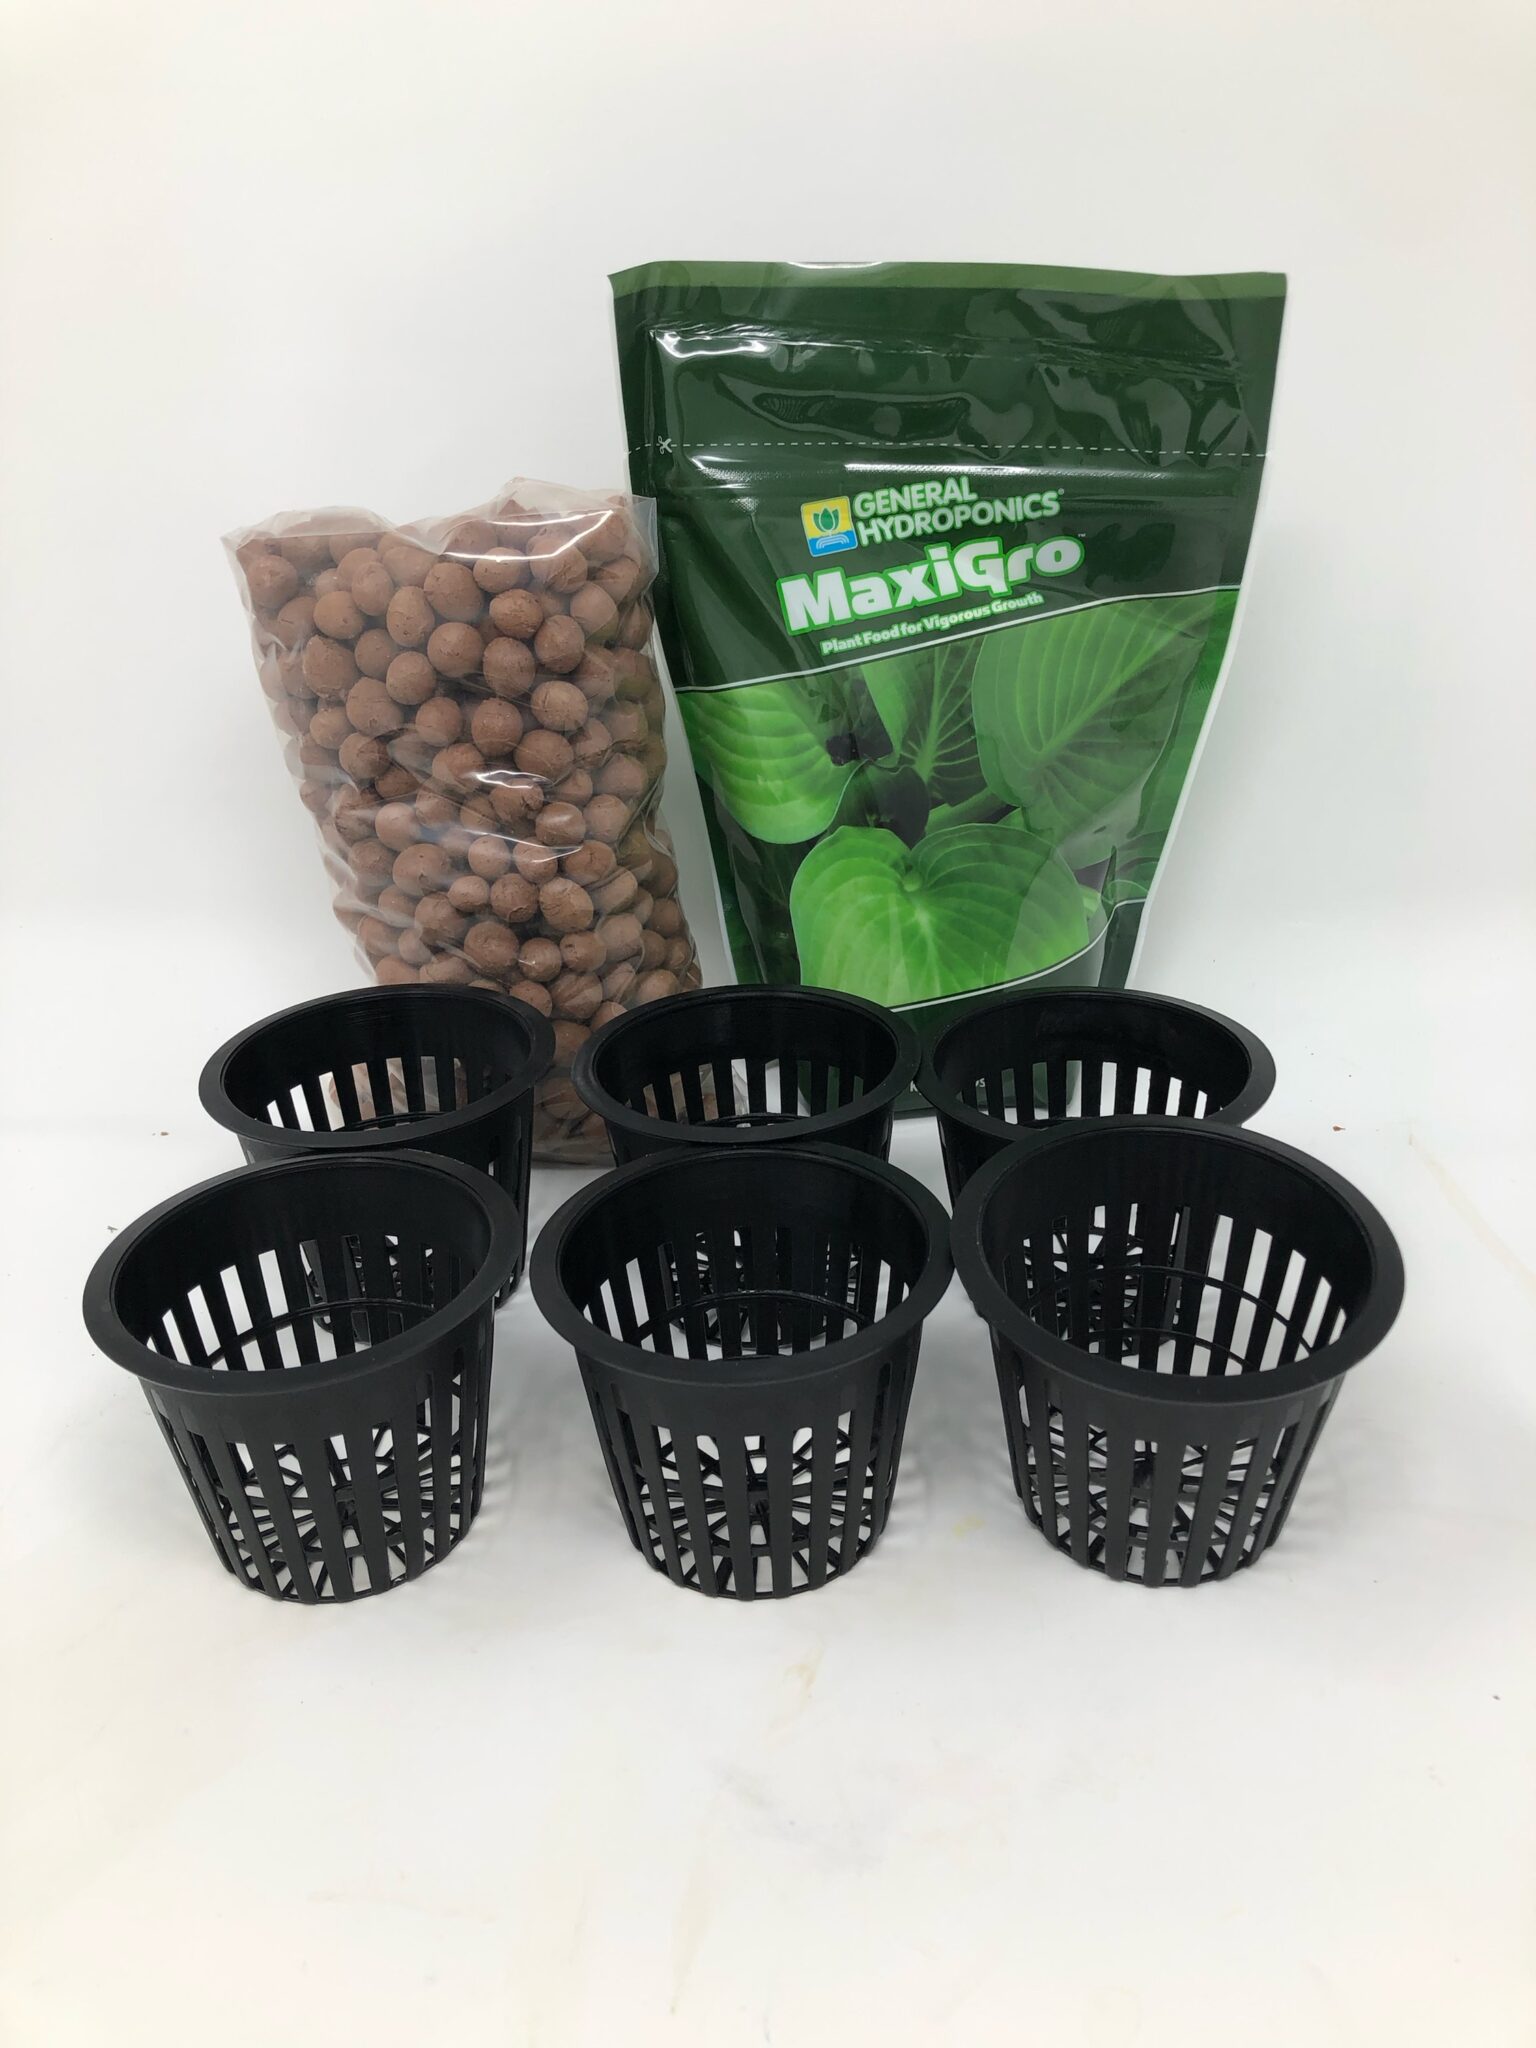 Hydroponic Nutrients clay pellets and net cups